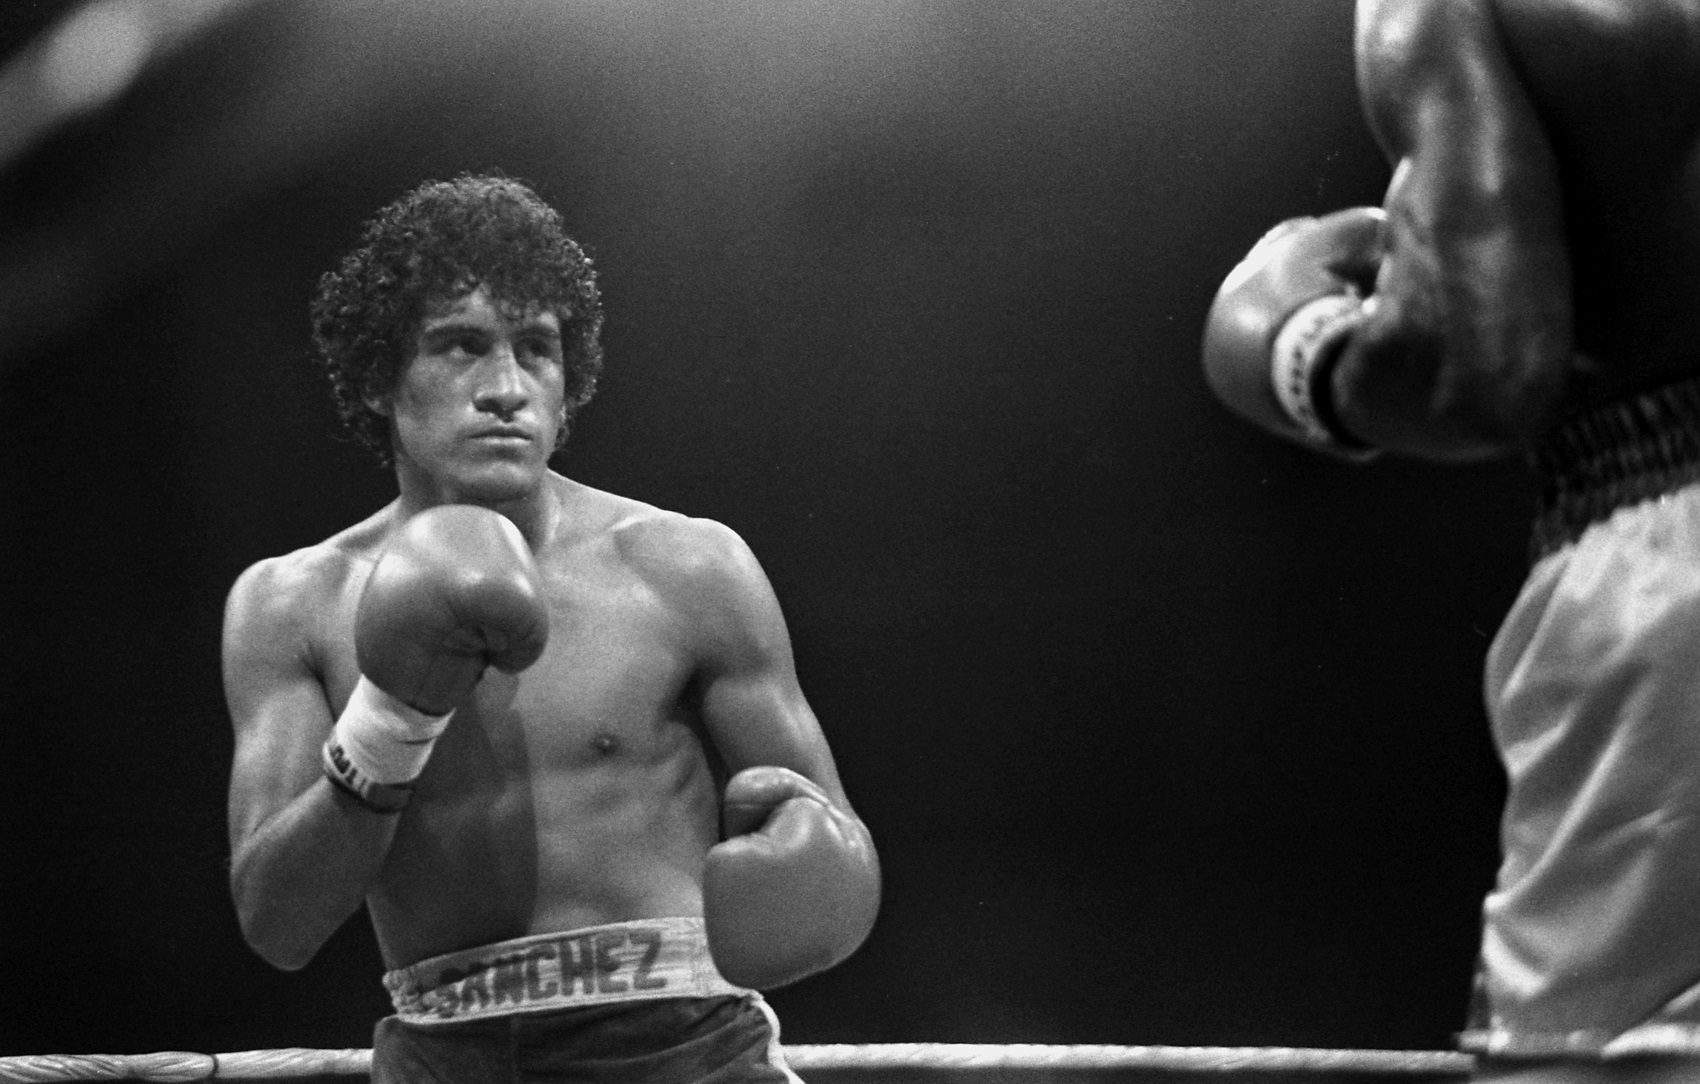 Star boxer Salvador Sanchez holds his fists up in the boxing ring